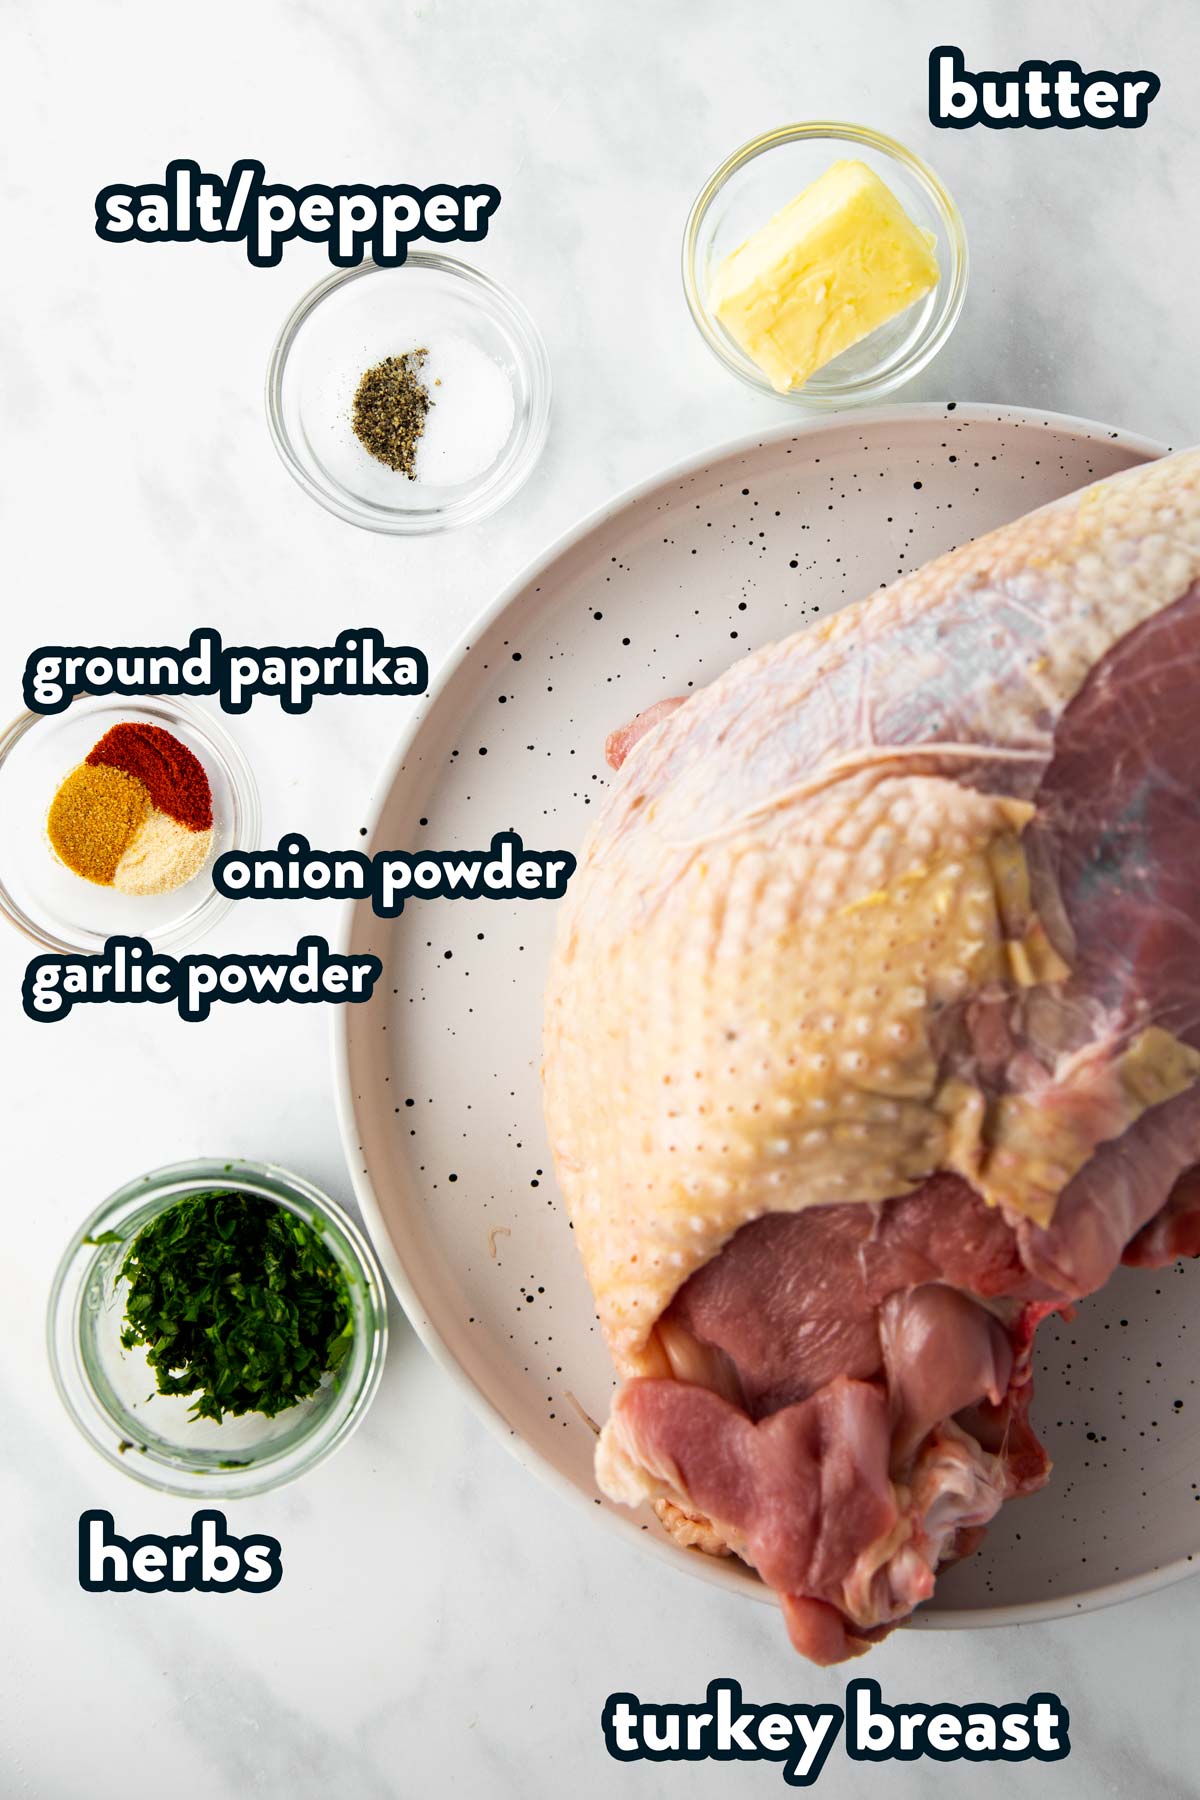 ingredients for air fryer turkey breast with text labels